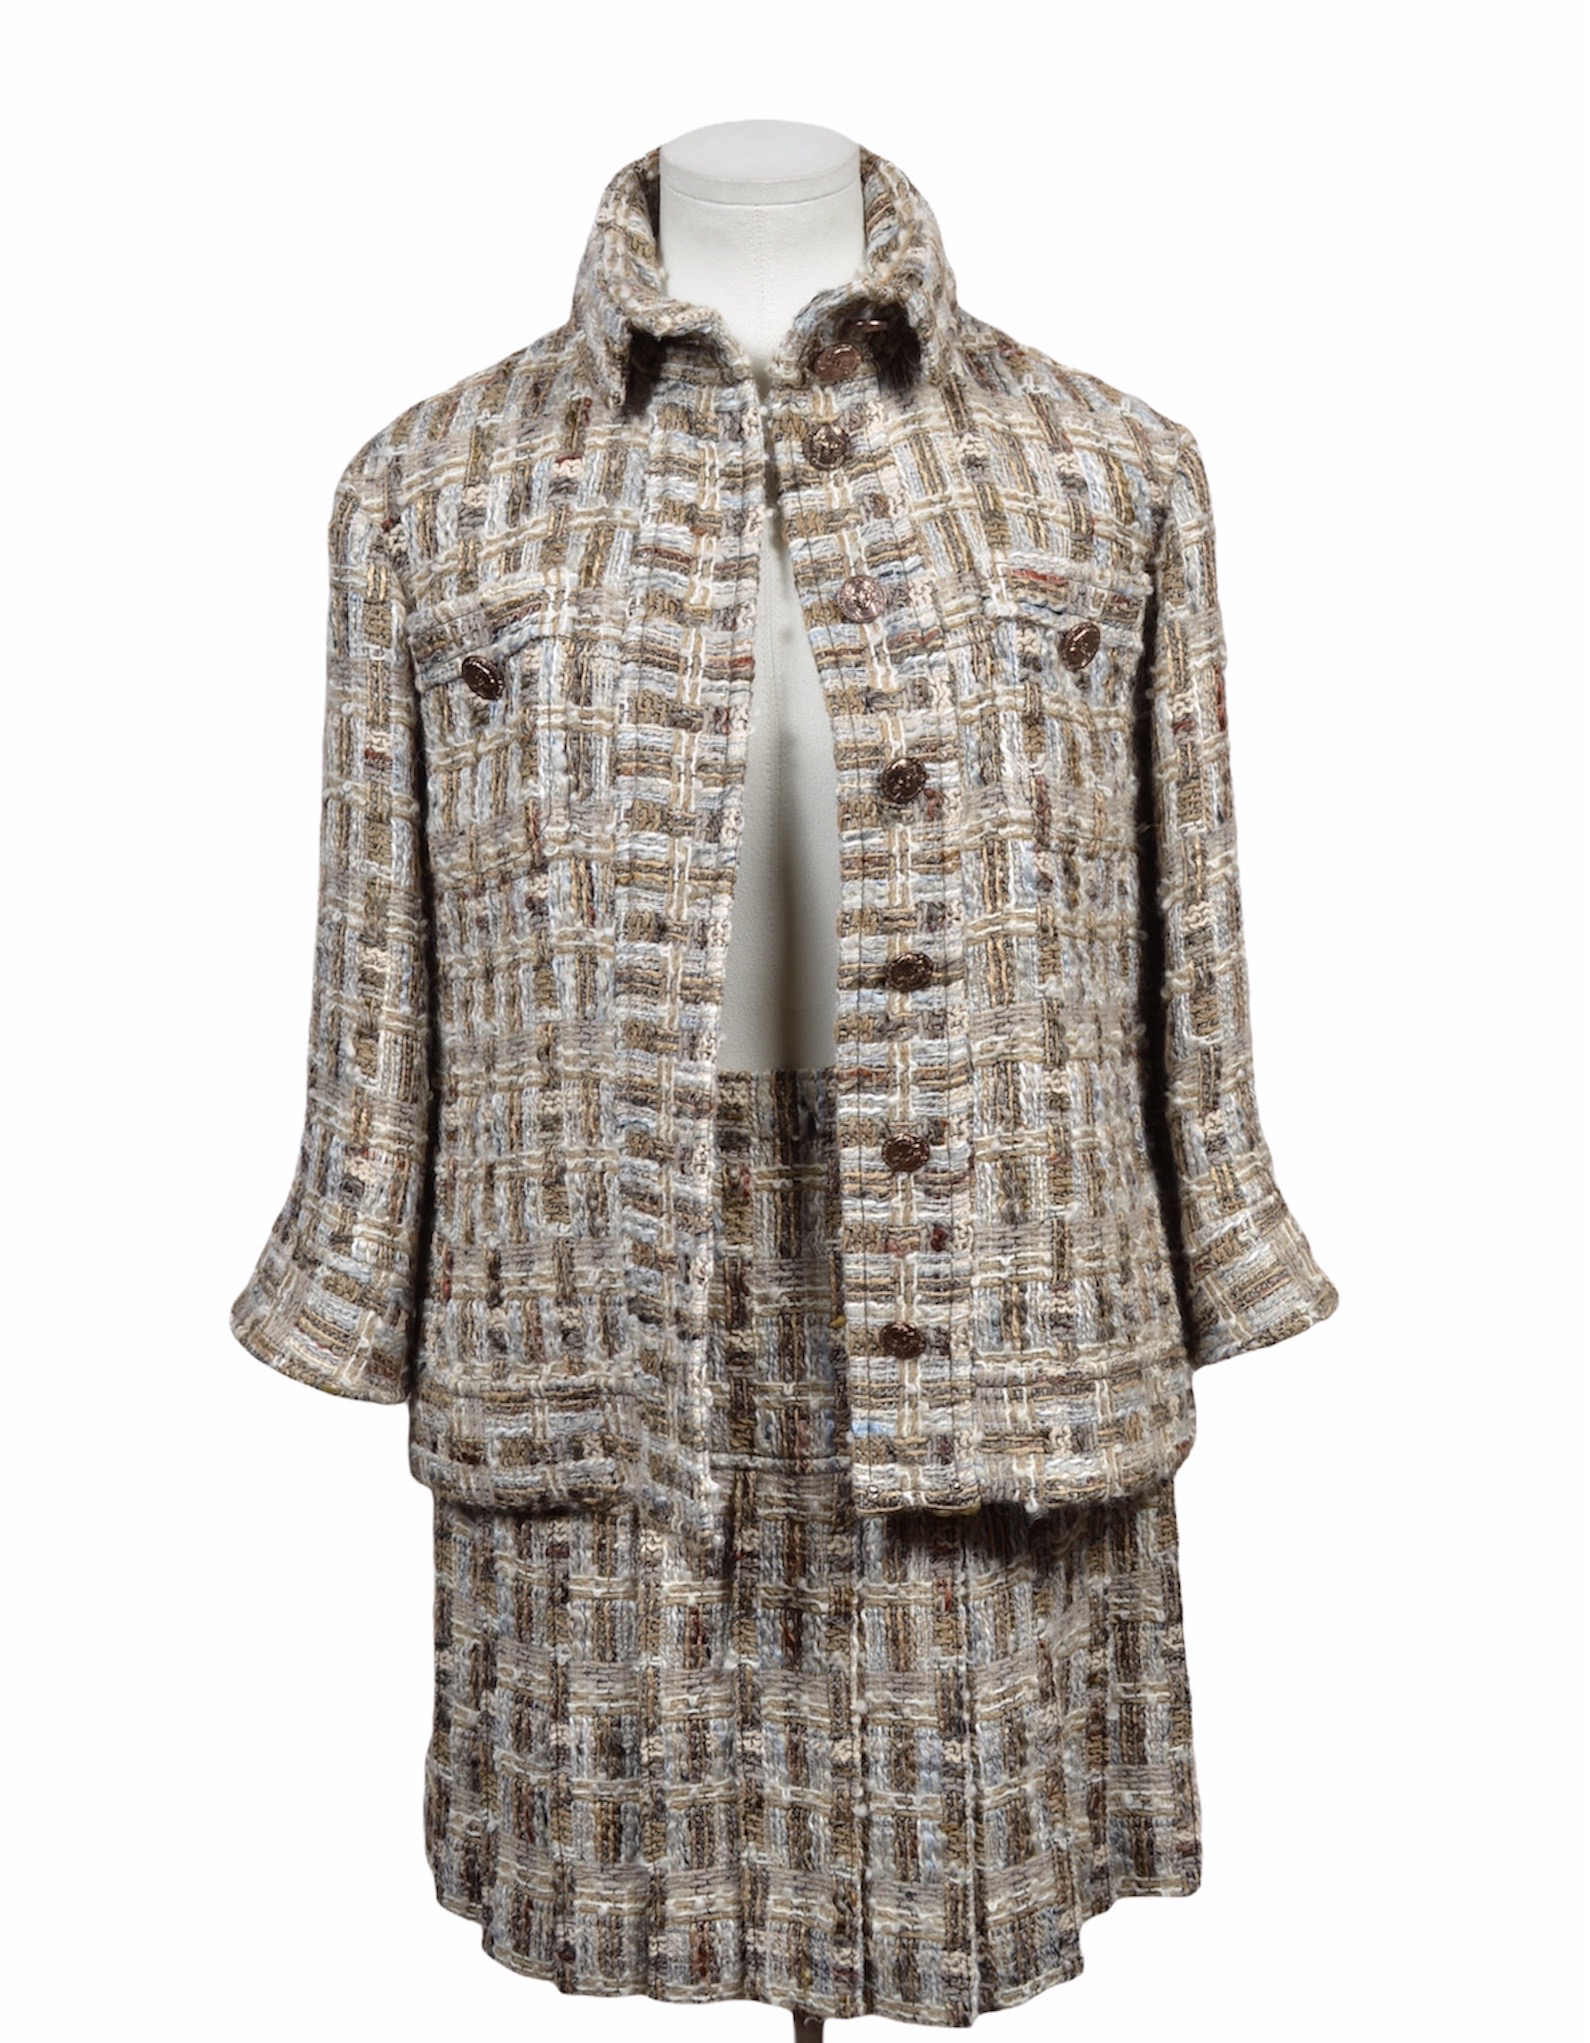 Chanel Vintage Beige Wool TwoPiece Jacket and Skirt Suit  Amarcord  Vintage Fashion